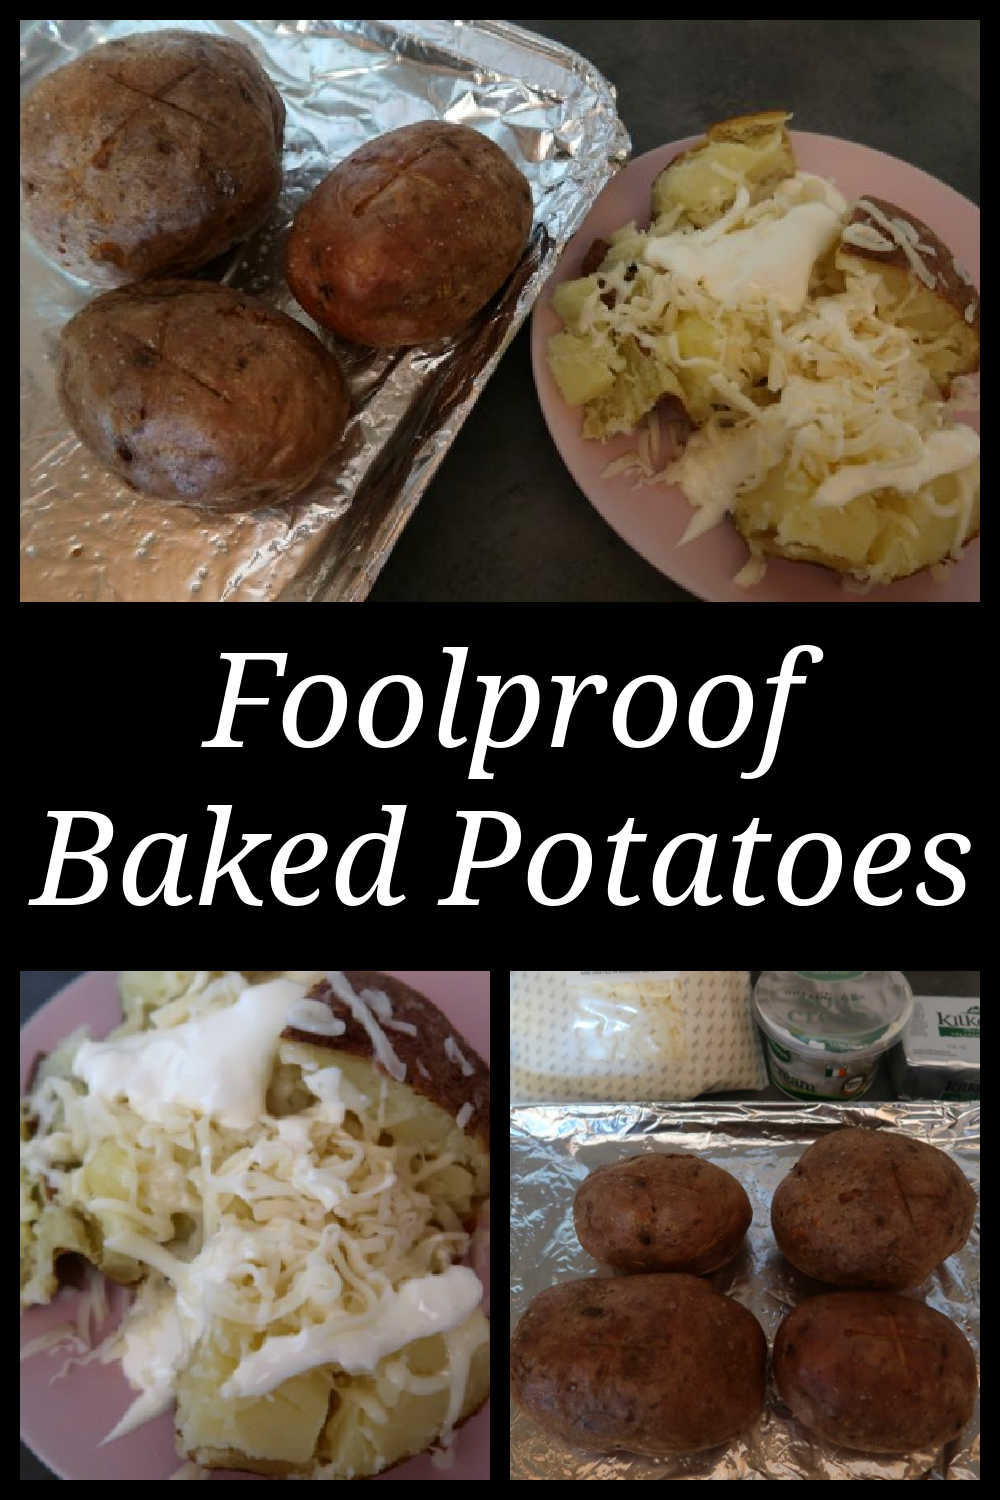 Foolproof Easy Baked Potatoes Recipe - How to make the easiest whole roasted crispy jacket potatoes in the oven. With the video tutorial.